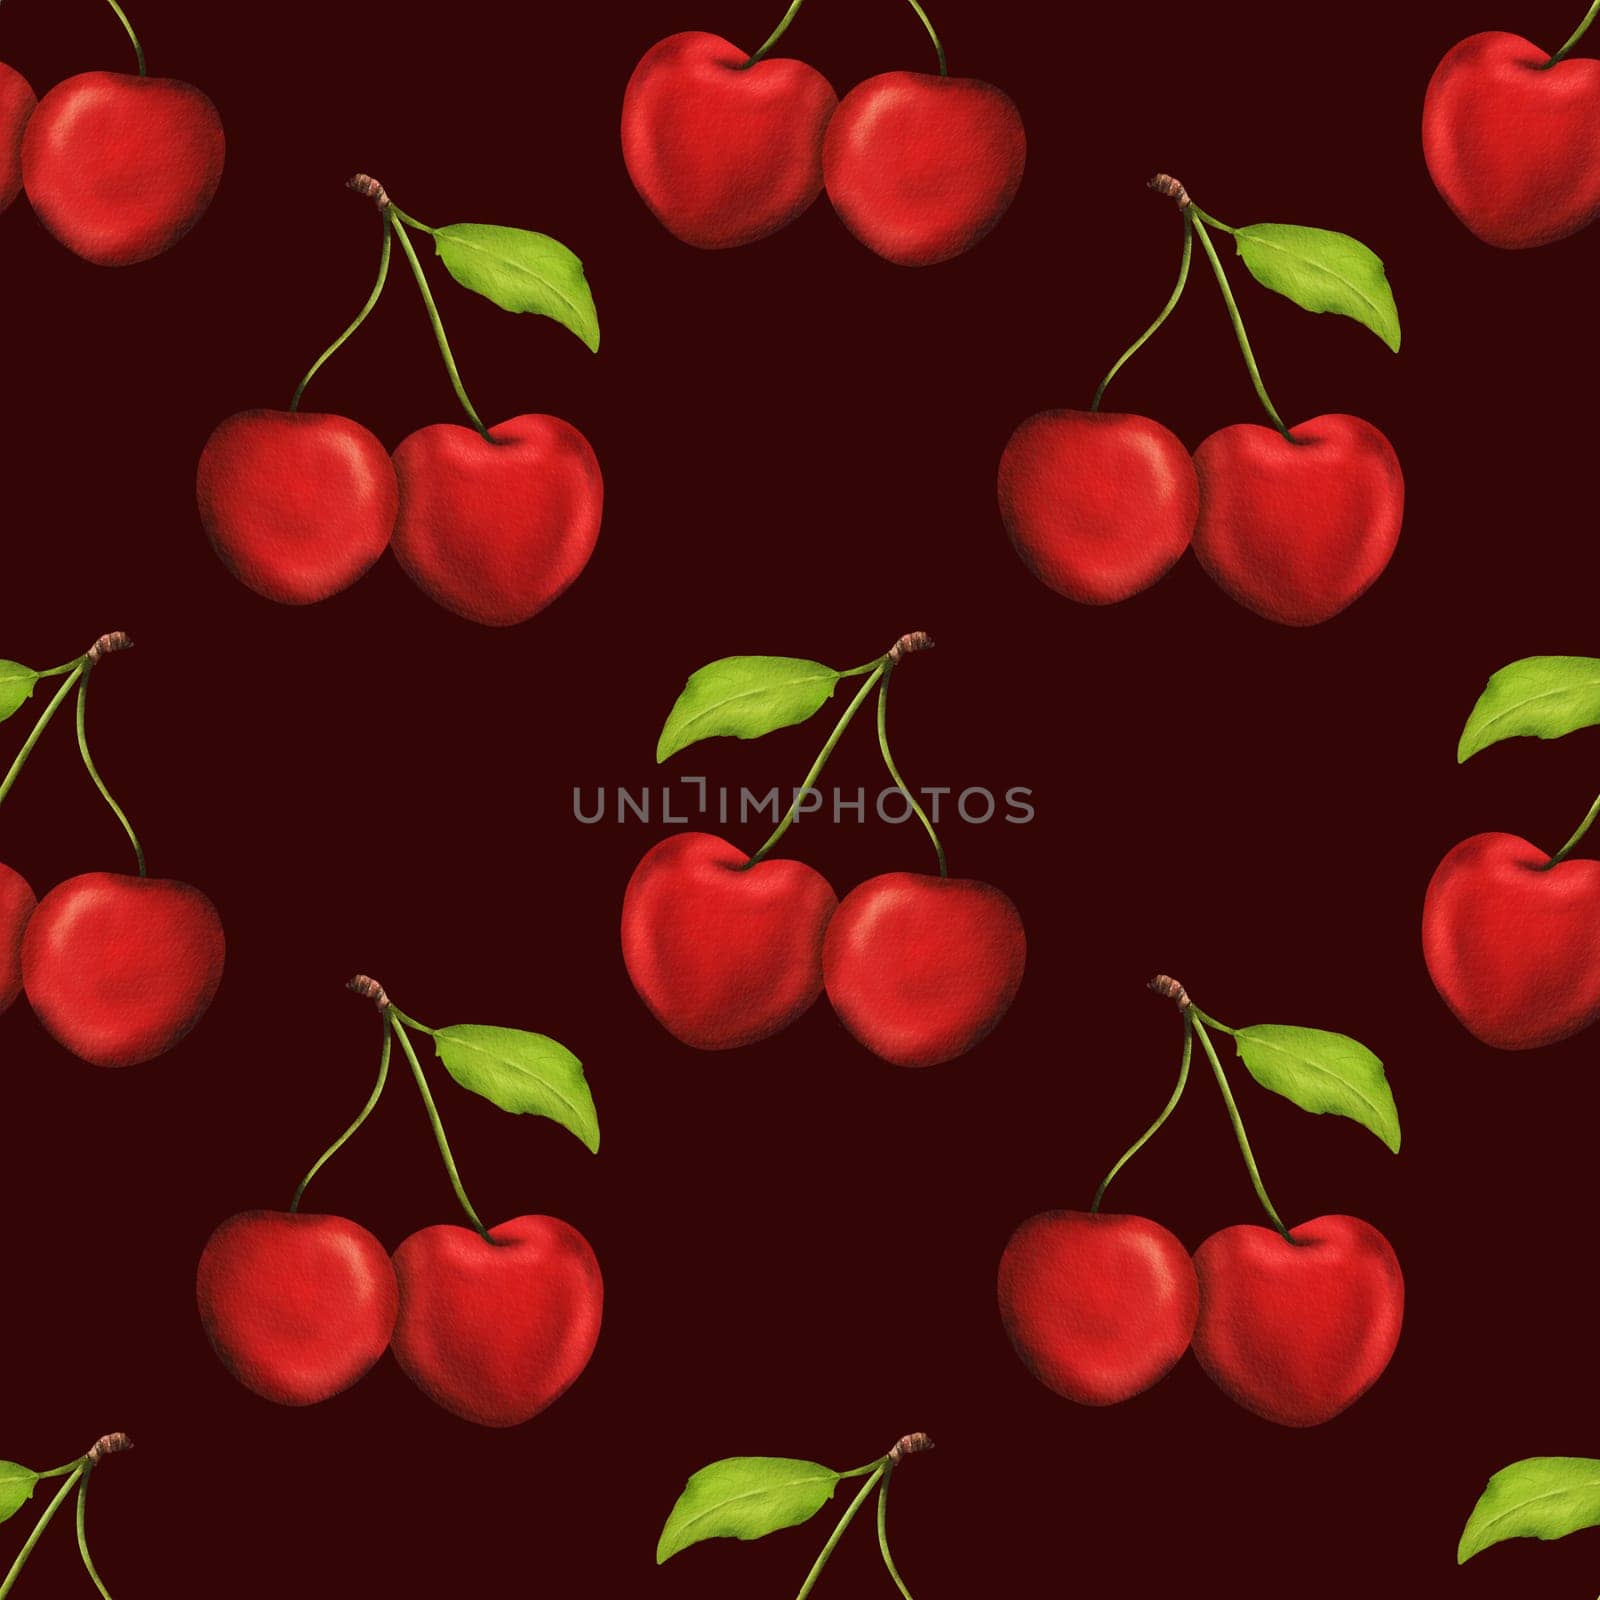 seamless pattern of luscious bright cherries. for kitchen-themed decor, recipes, textiles, aprons, packaging, cherry products like jam and sweets, as well as gum wrappers. Dark background by Art_Mari_Ka